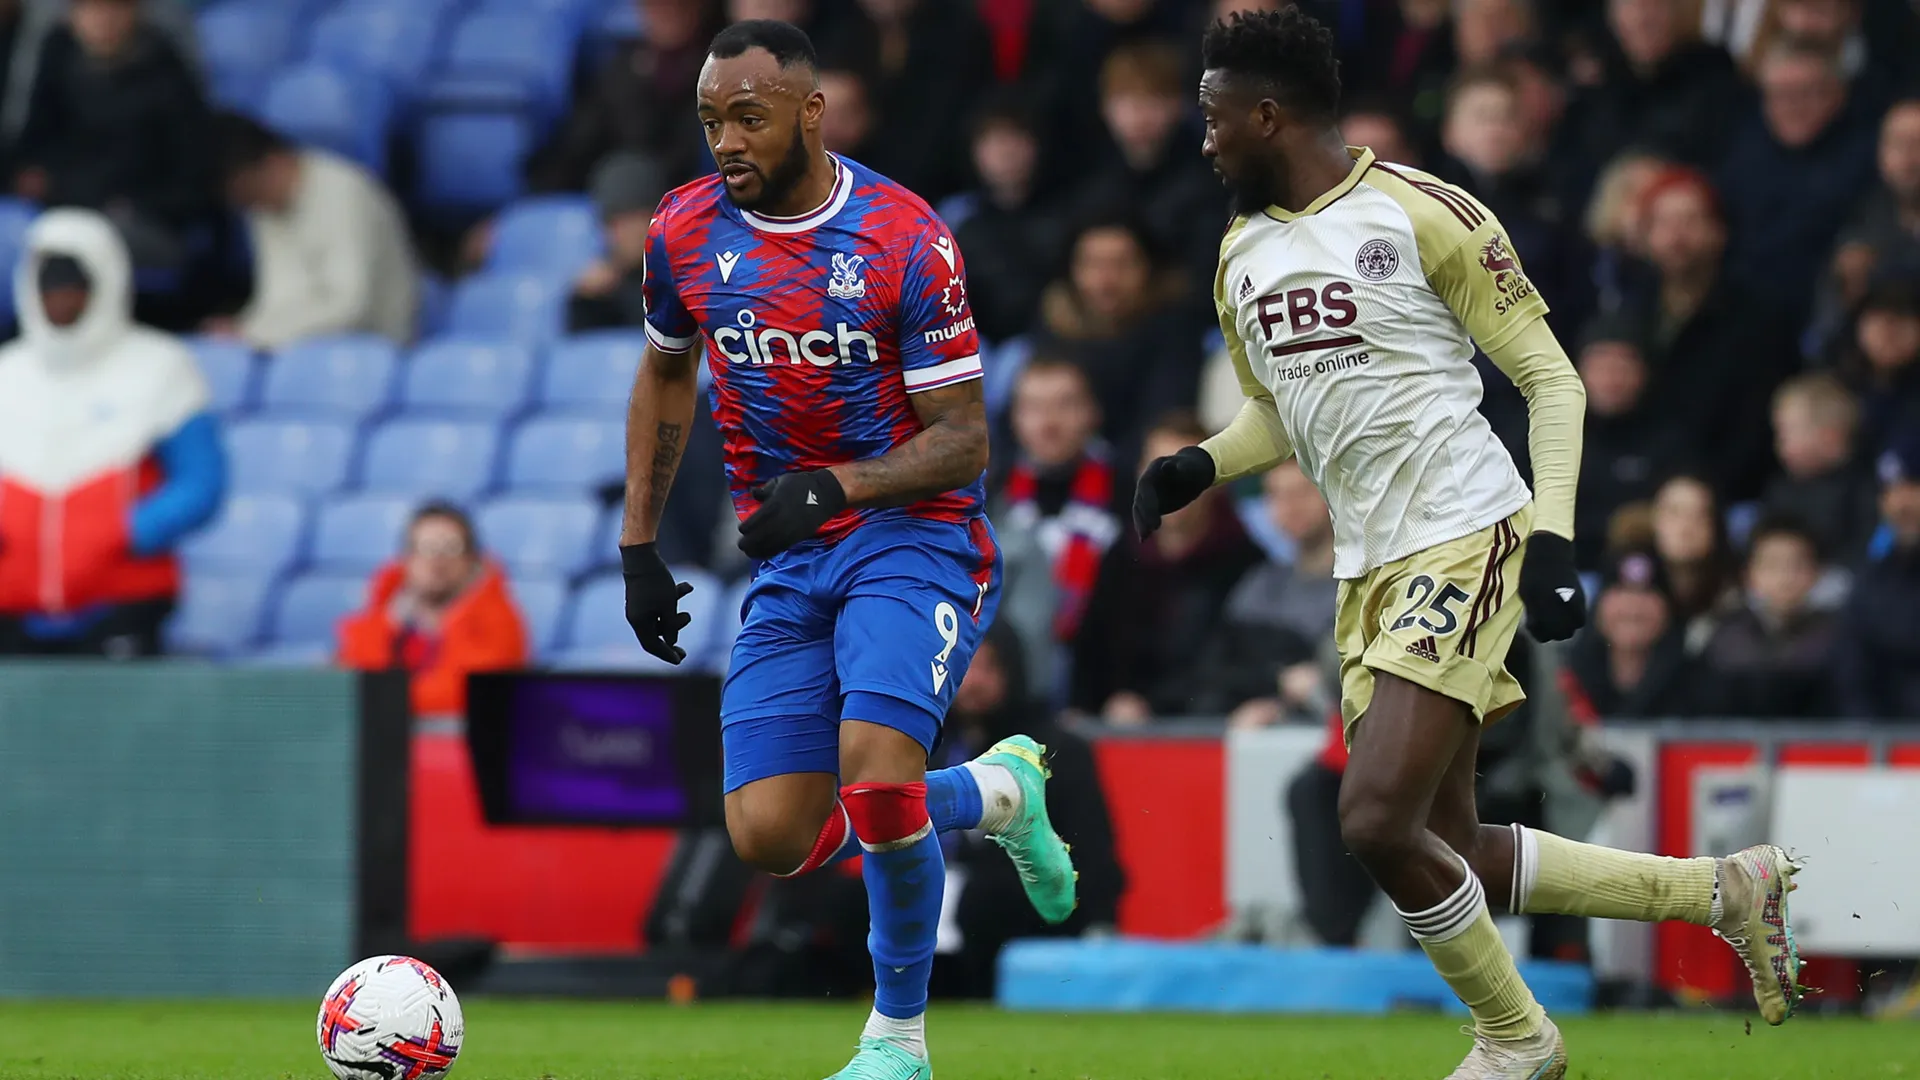 Jordan Ayew reacts to providing assist for winning goal against Leicester City